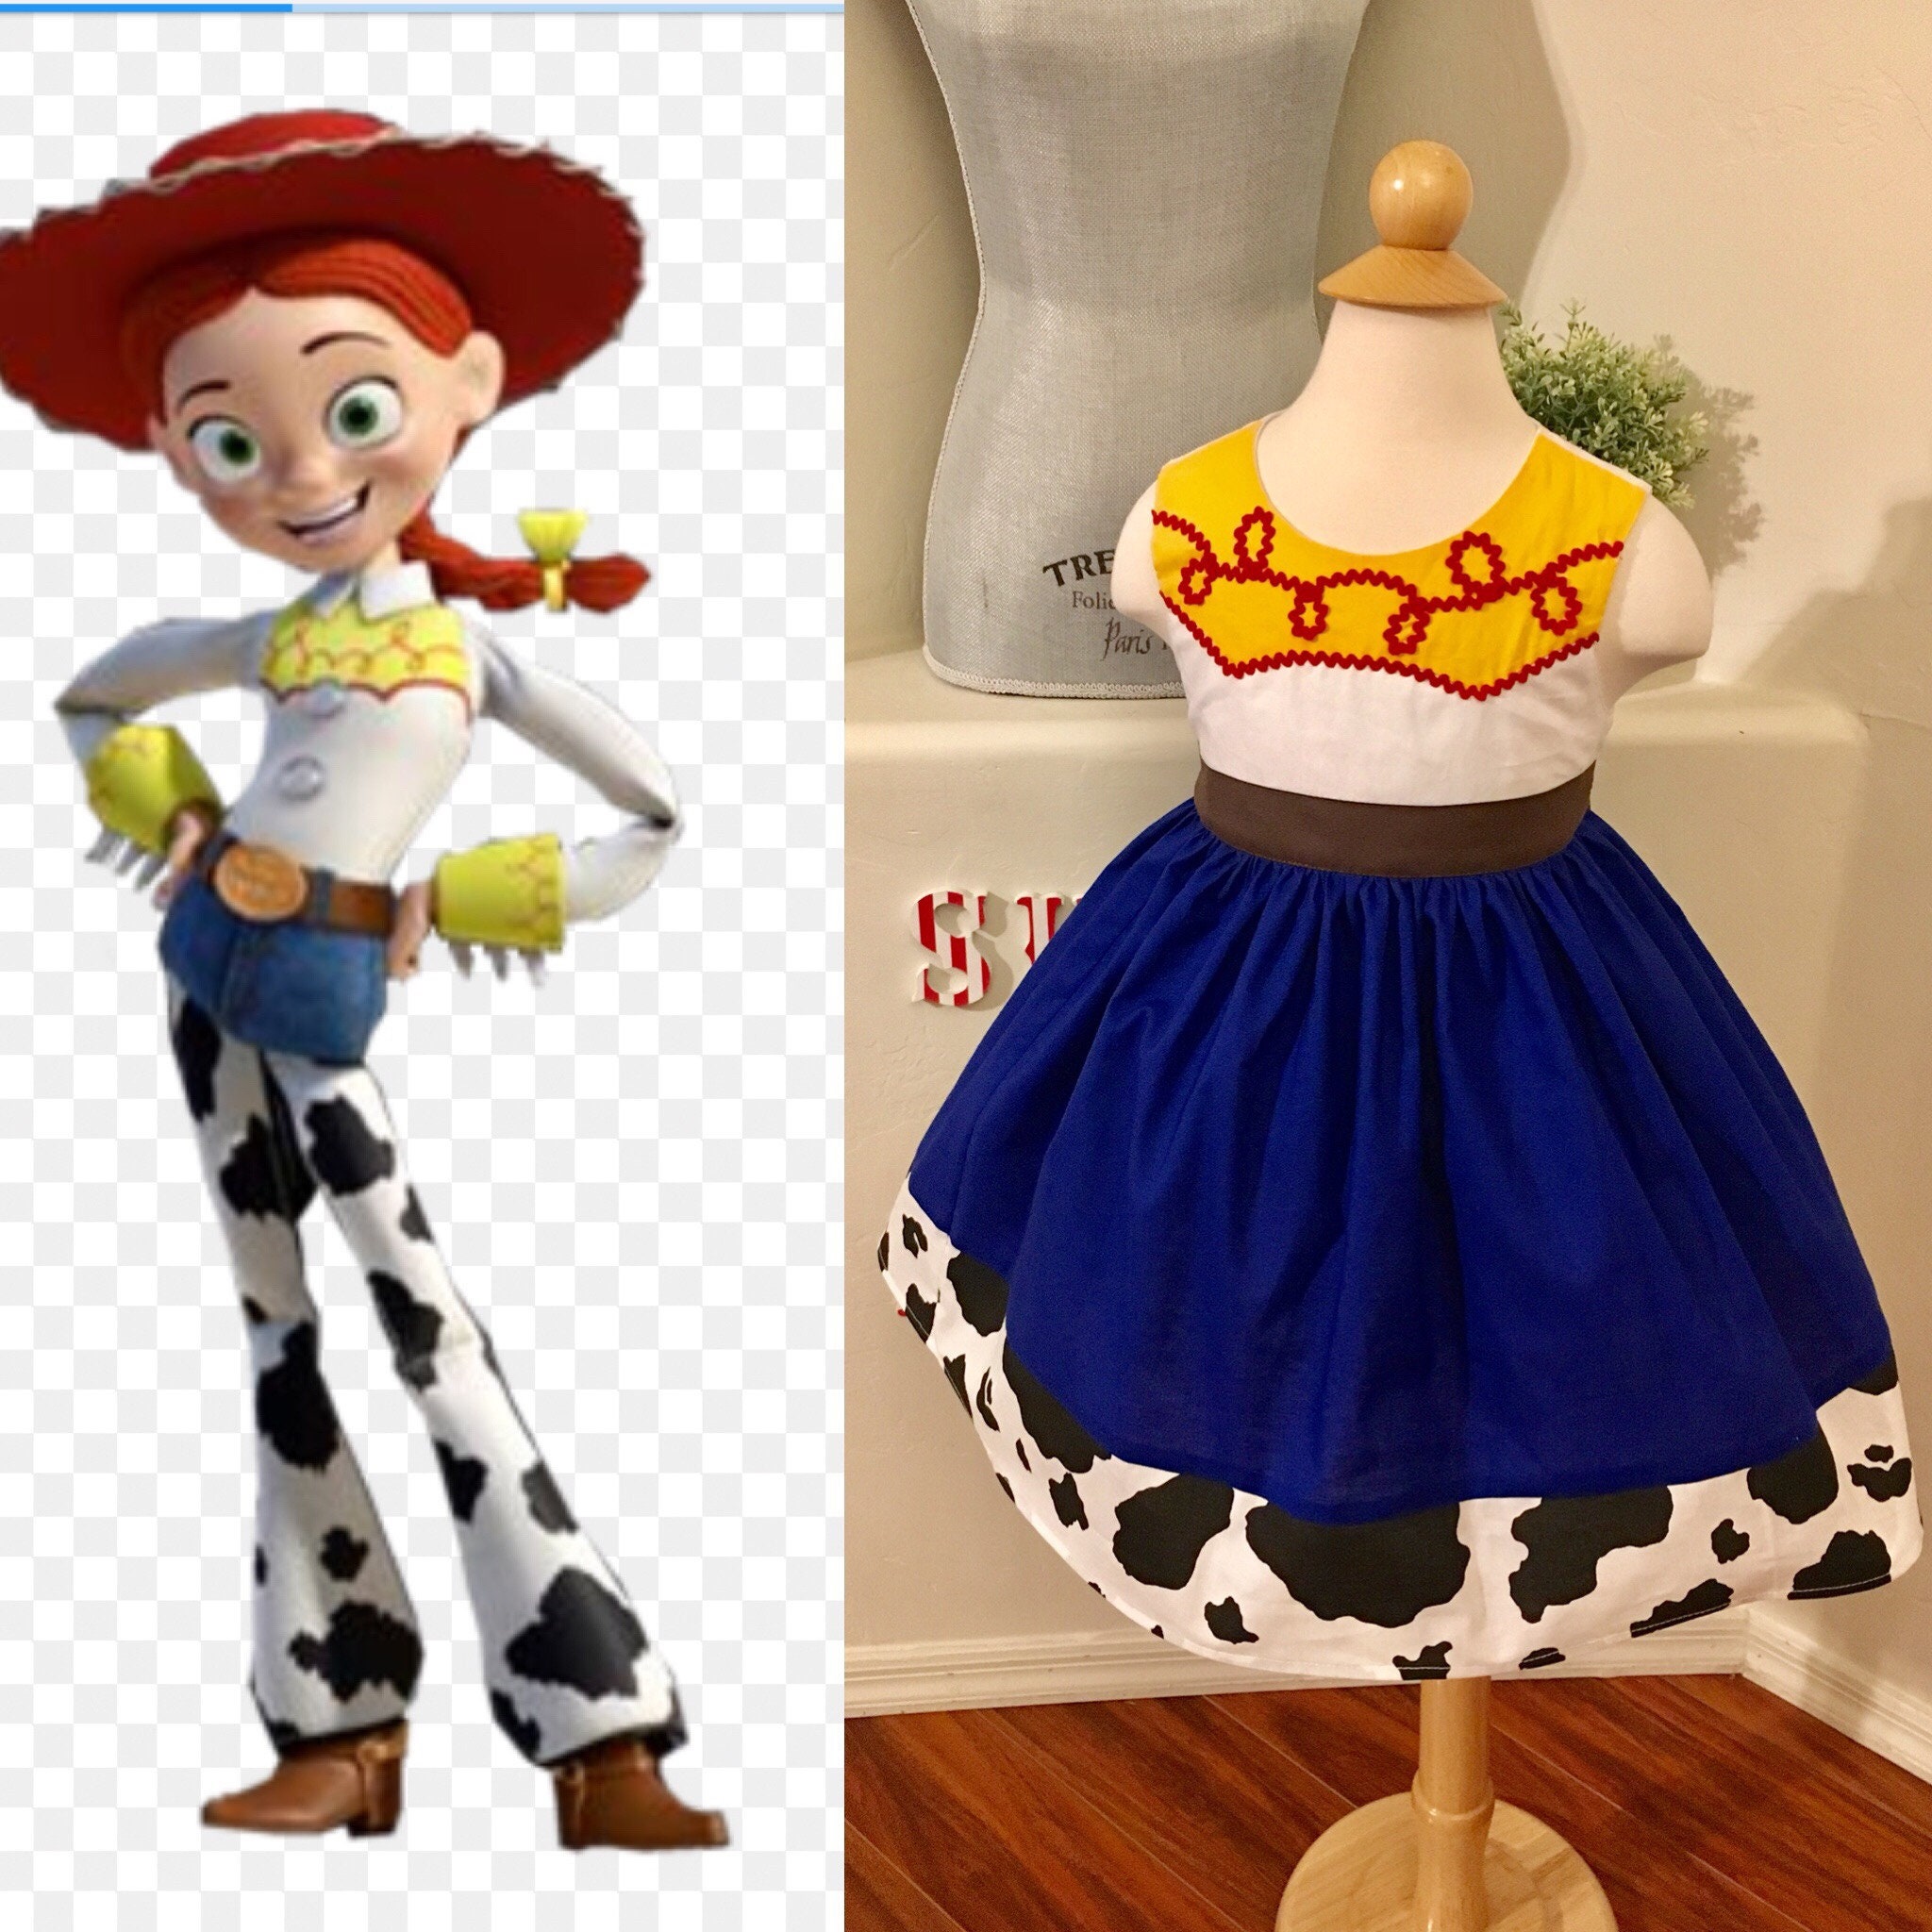 Custom Made to Order Toy Story Jessie Inspired Dress Sz 2T to | Etsy